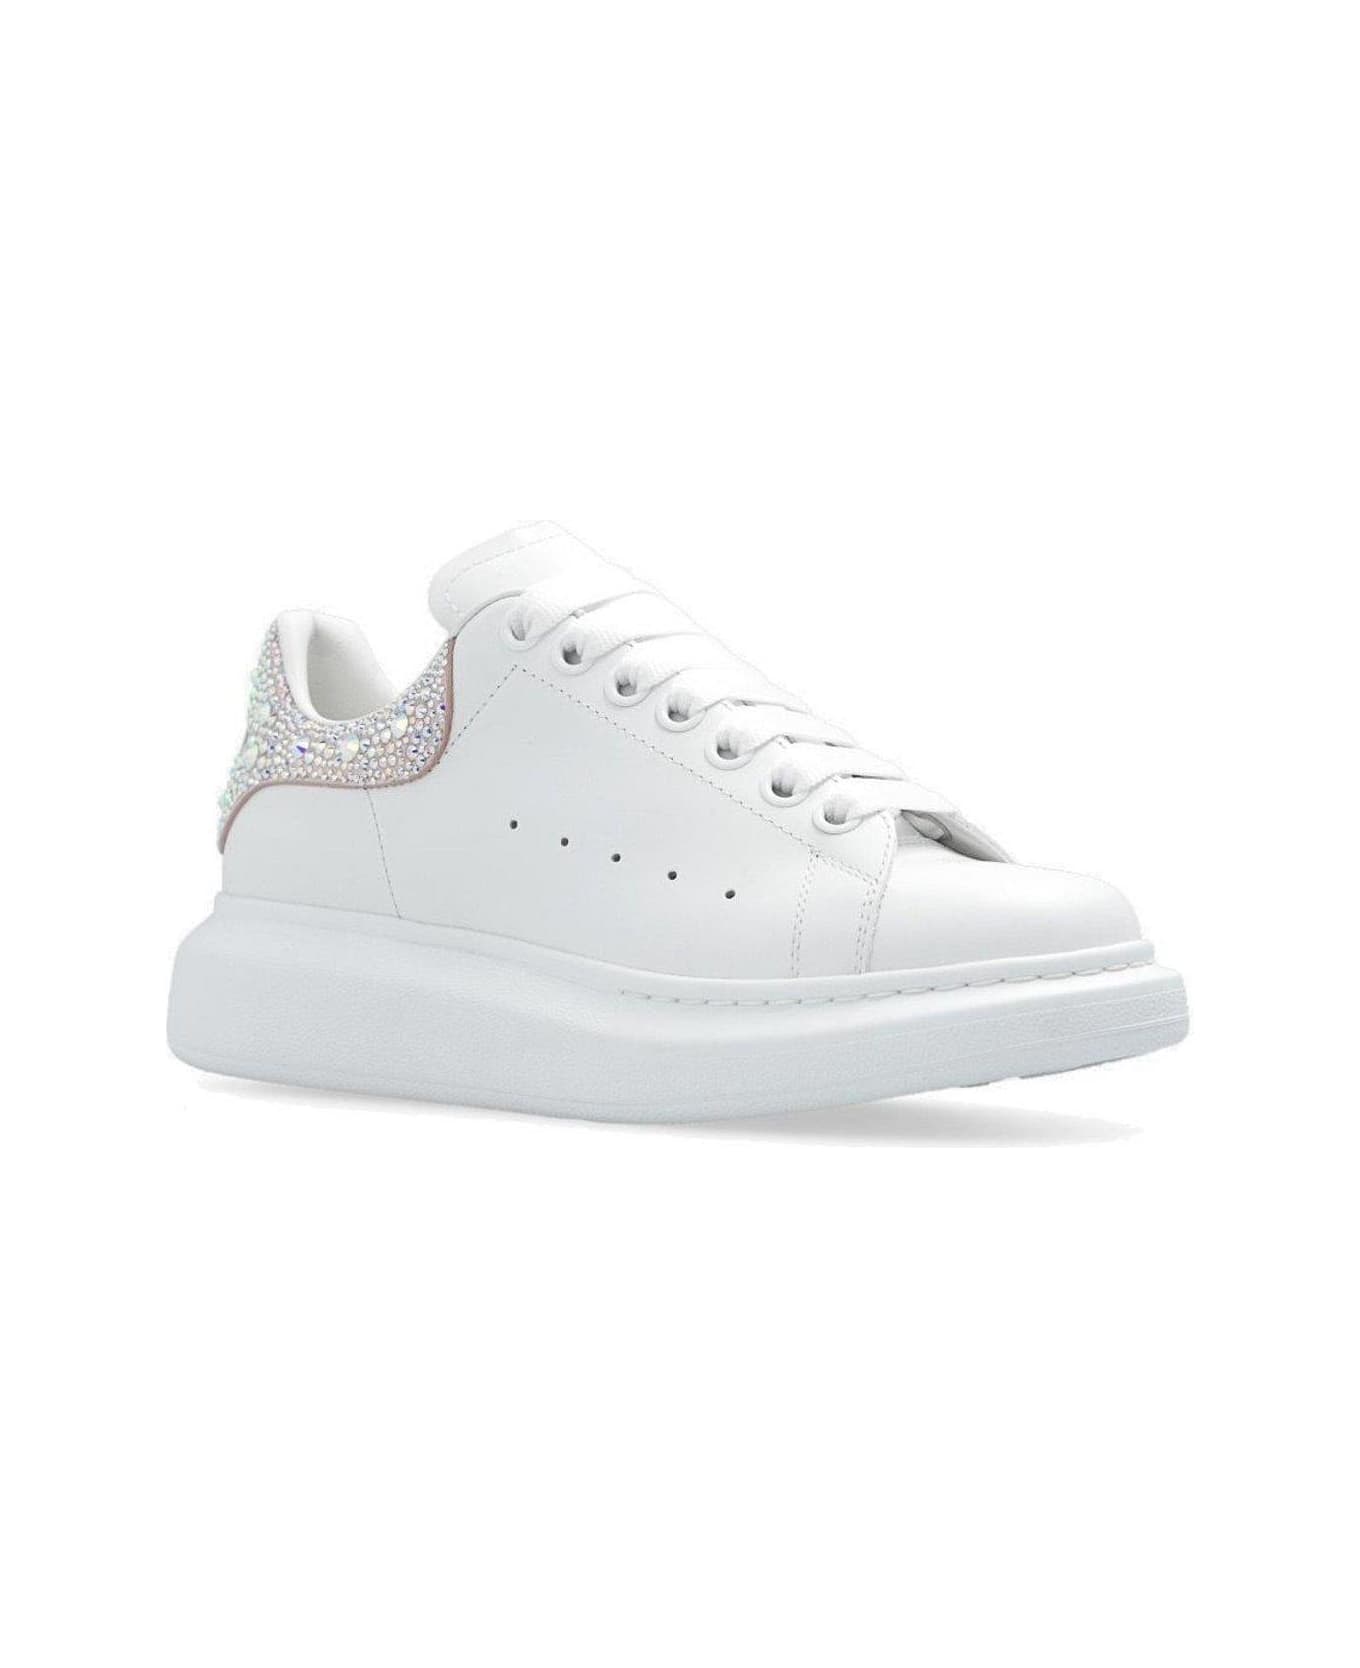 Alexander McQueen Larry Embellished Chunky Sneakers - WHITE/PORCELAIN